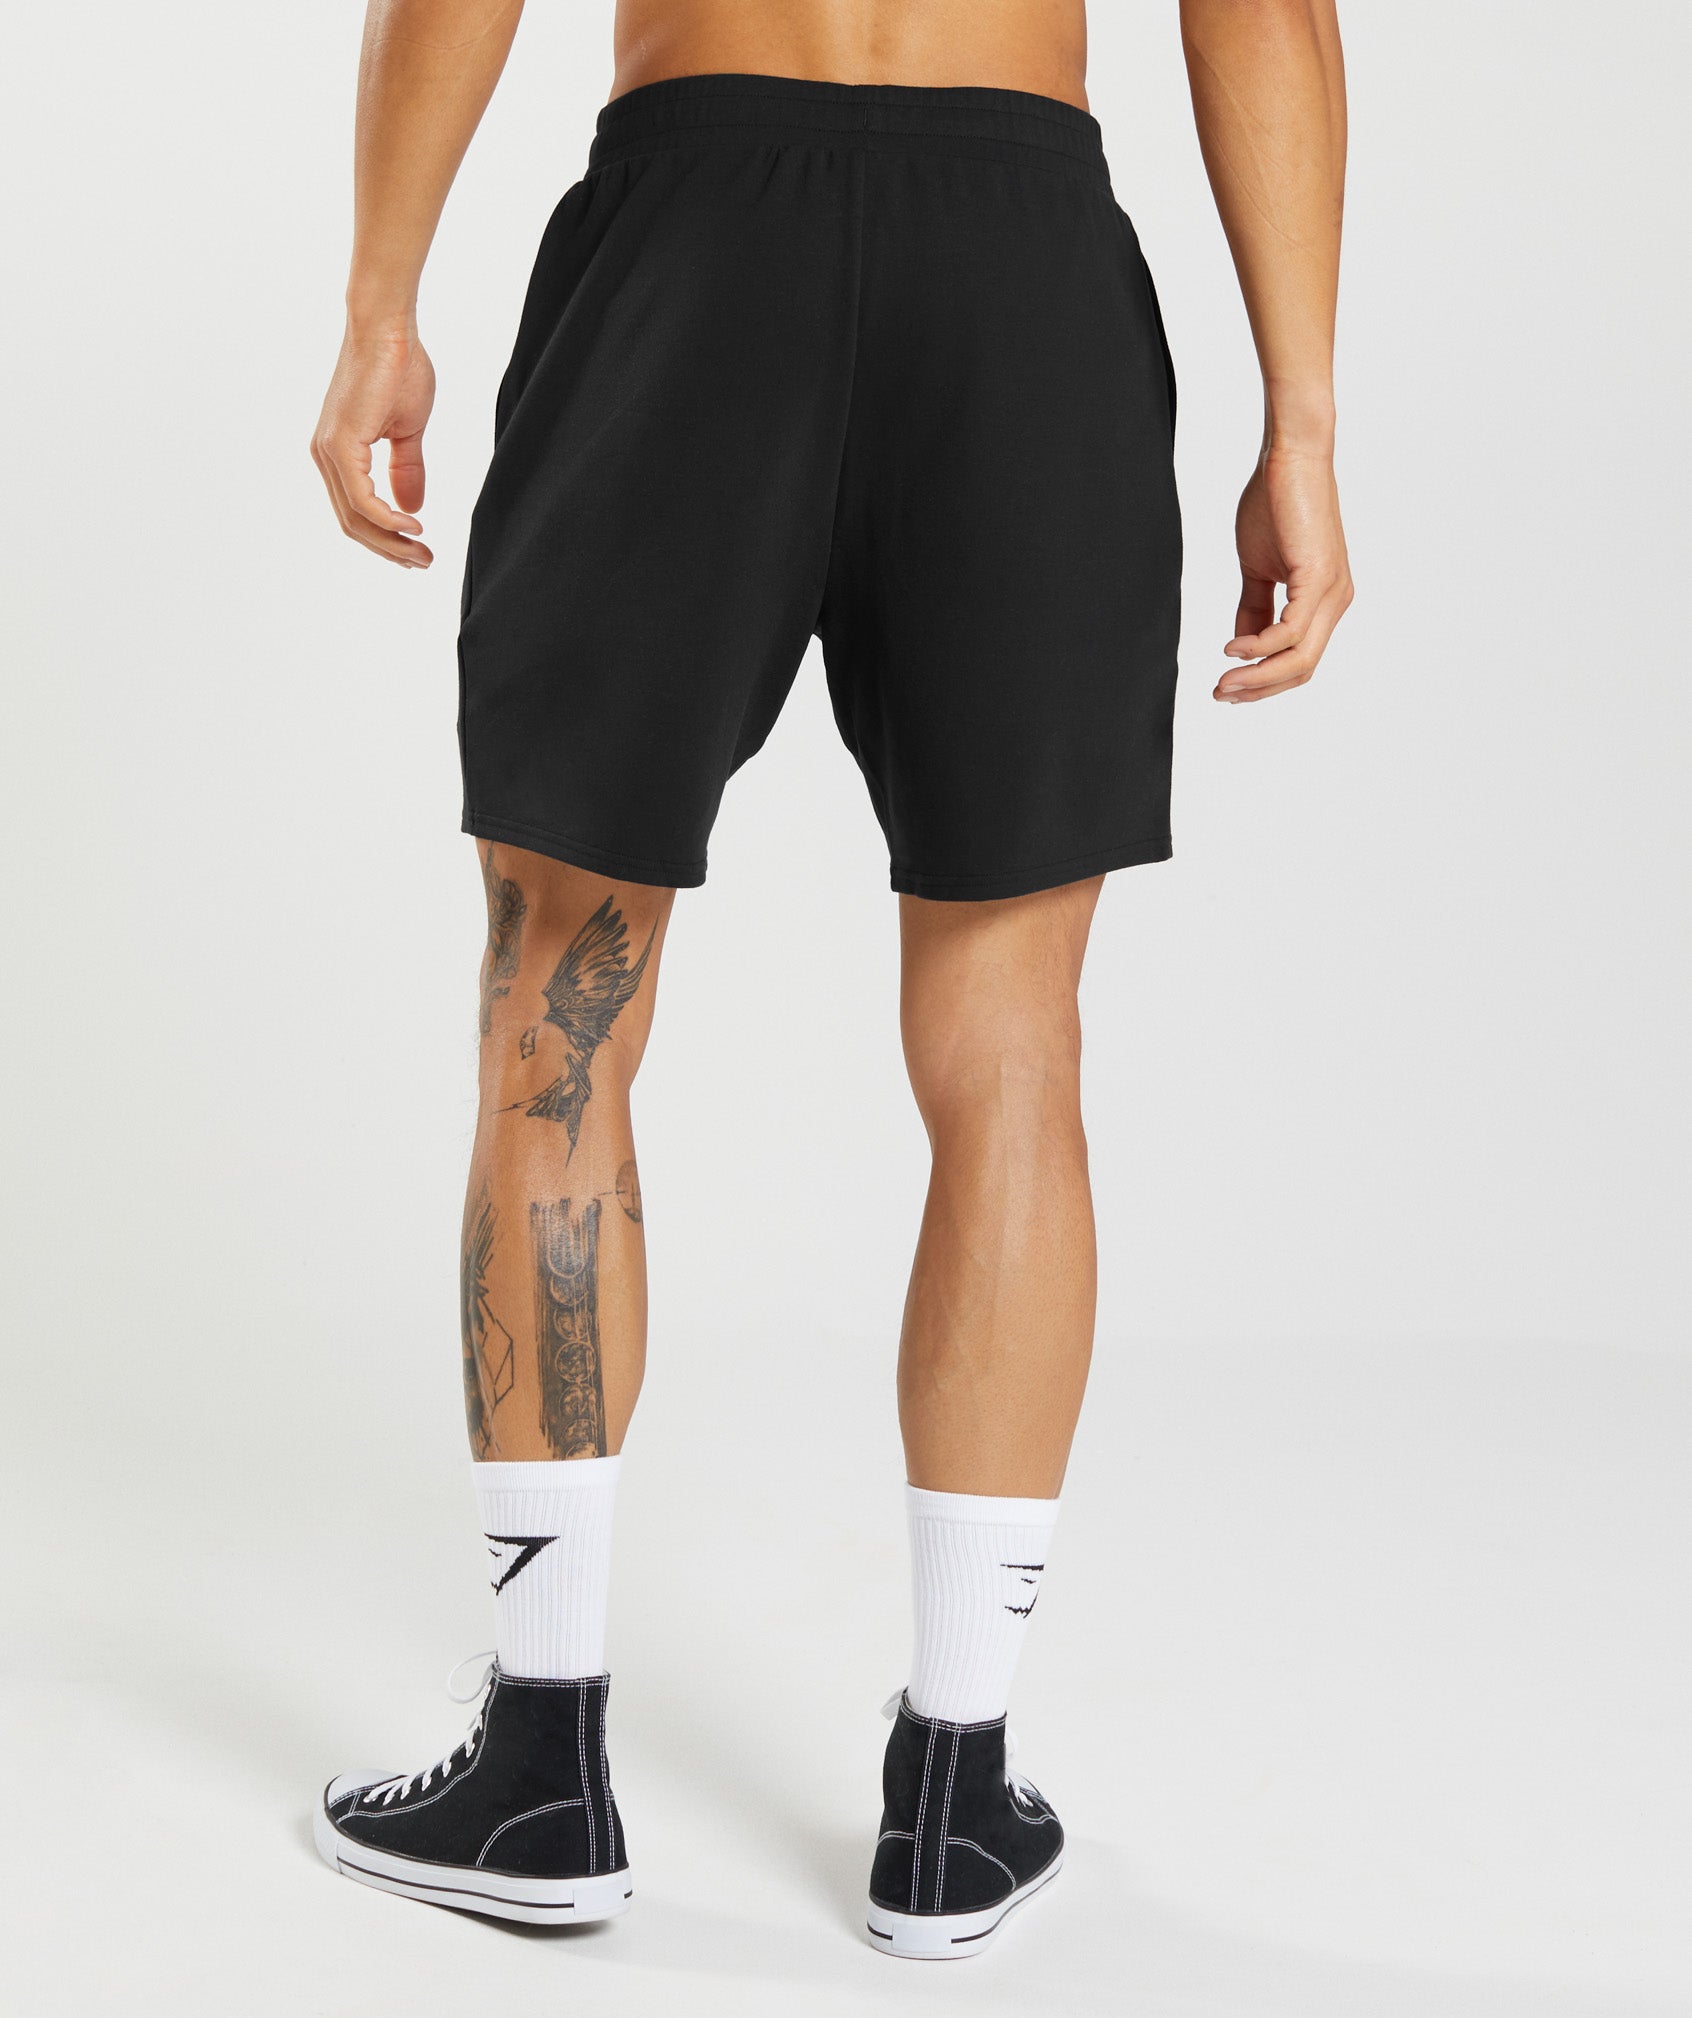 Critical 7" Shorts in Black - view 3